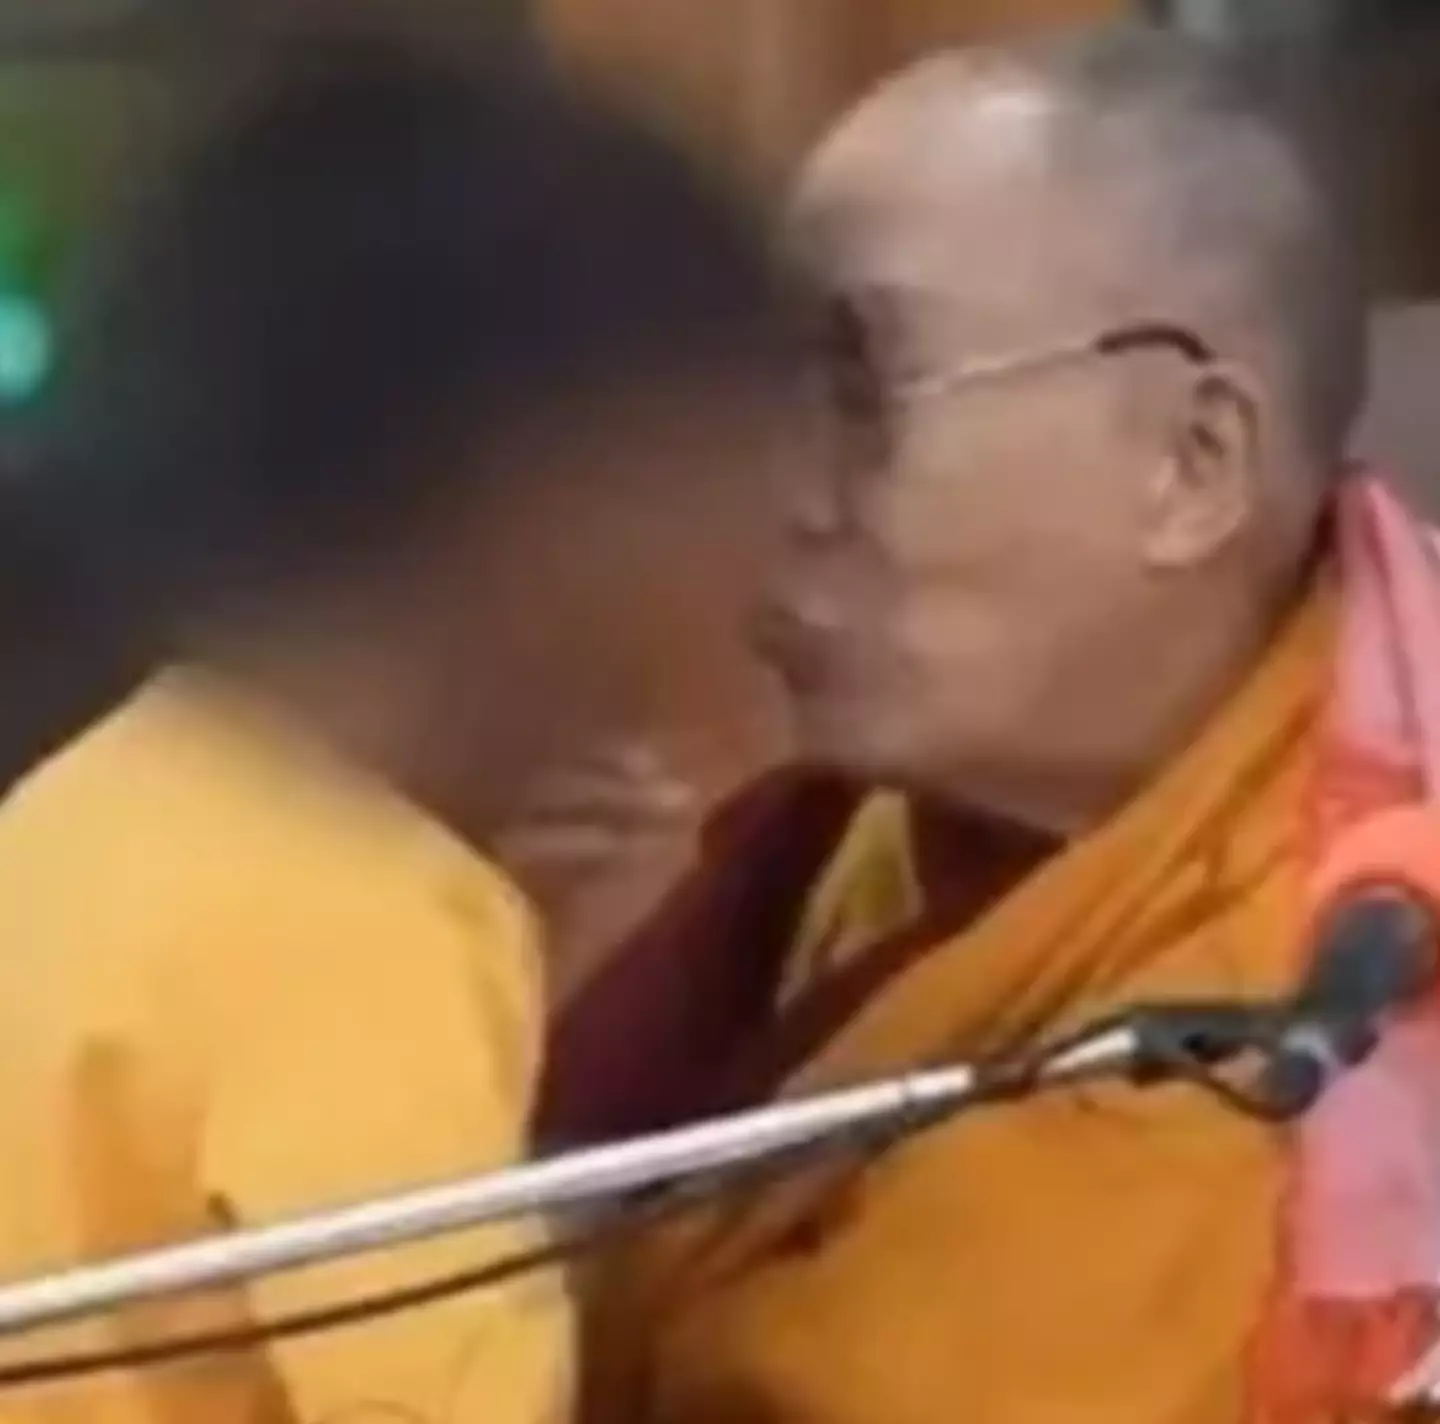 The Dalai Lama was seen kissing a school boy at a public event in northern India.